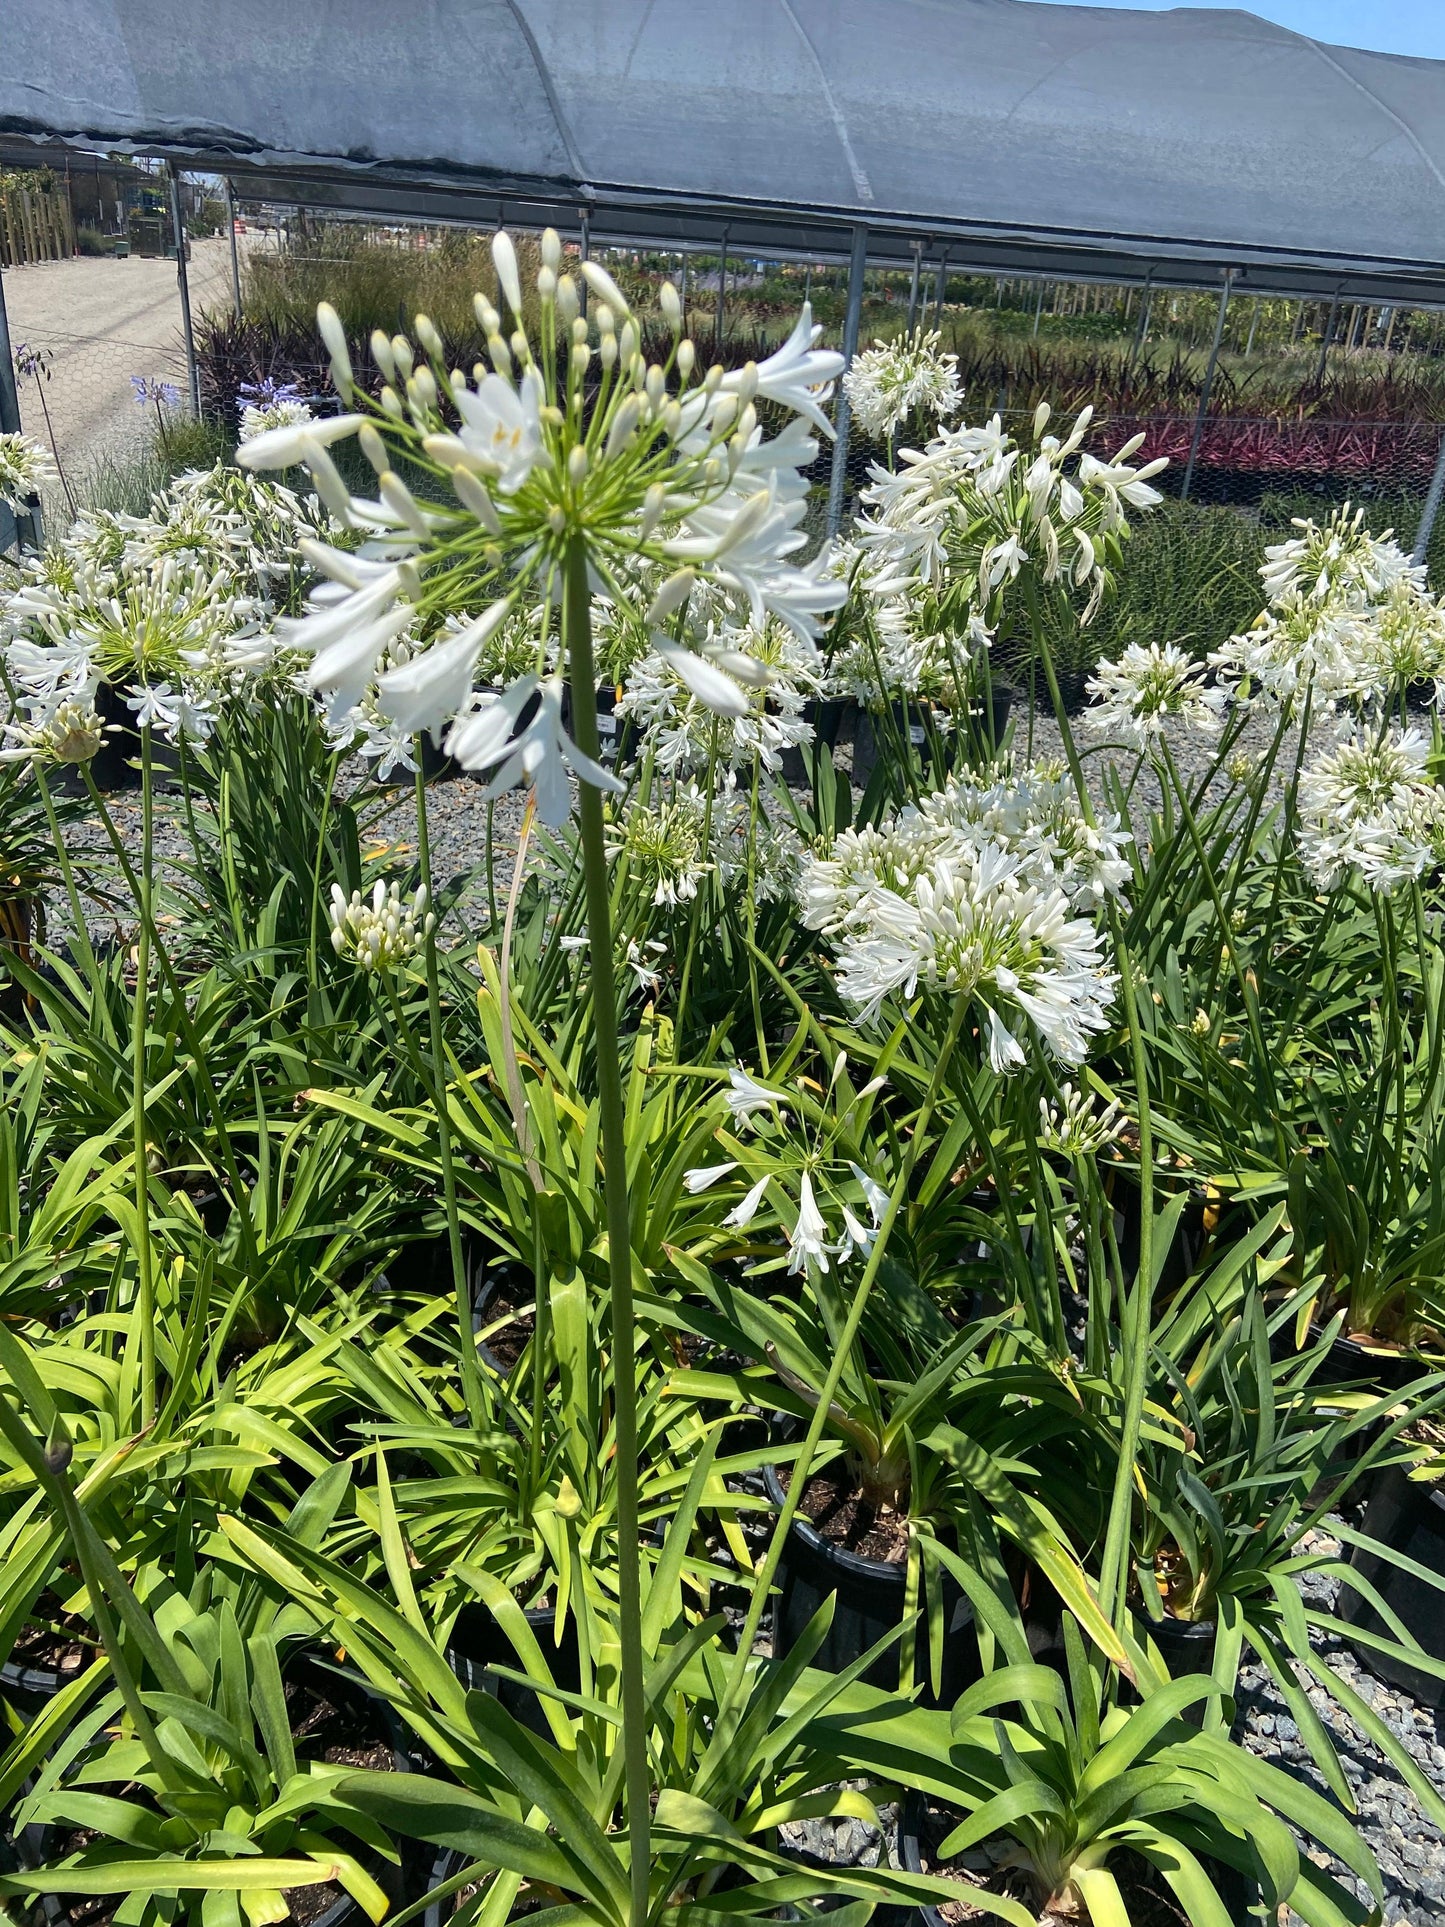 White Lily of the Nile - Agapanthus africanus 'Albus